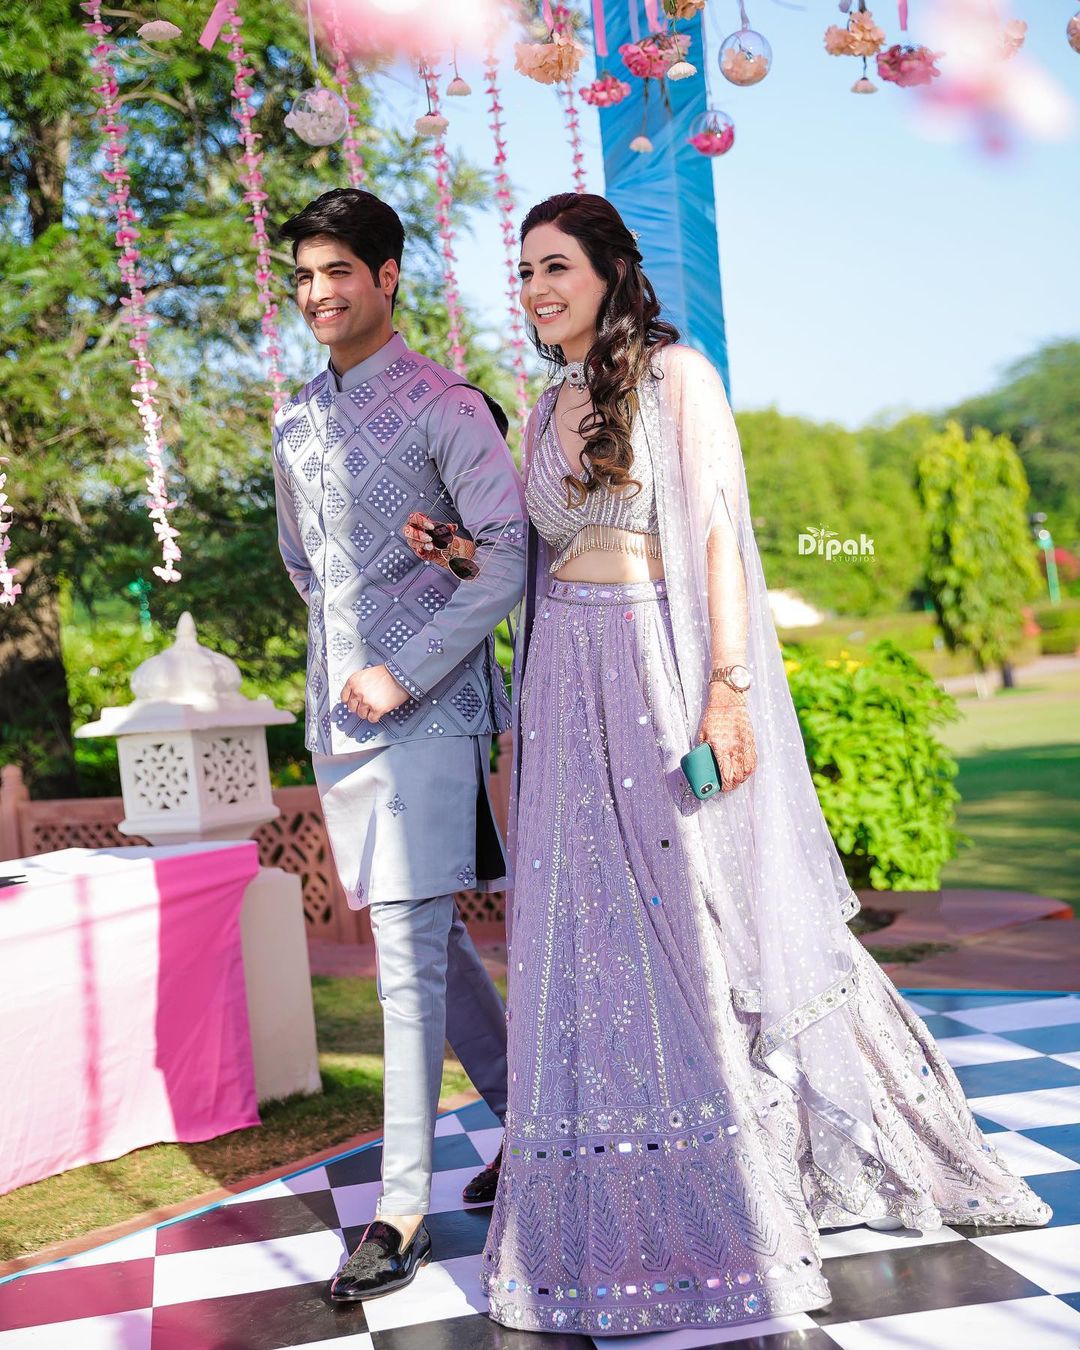 bride and groom in lavender engagement outfits